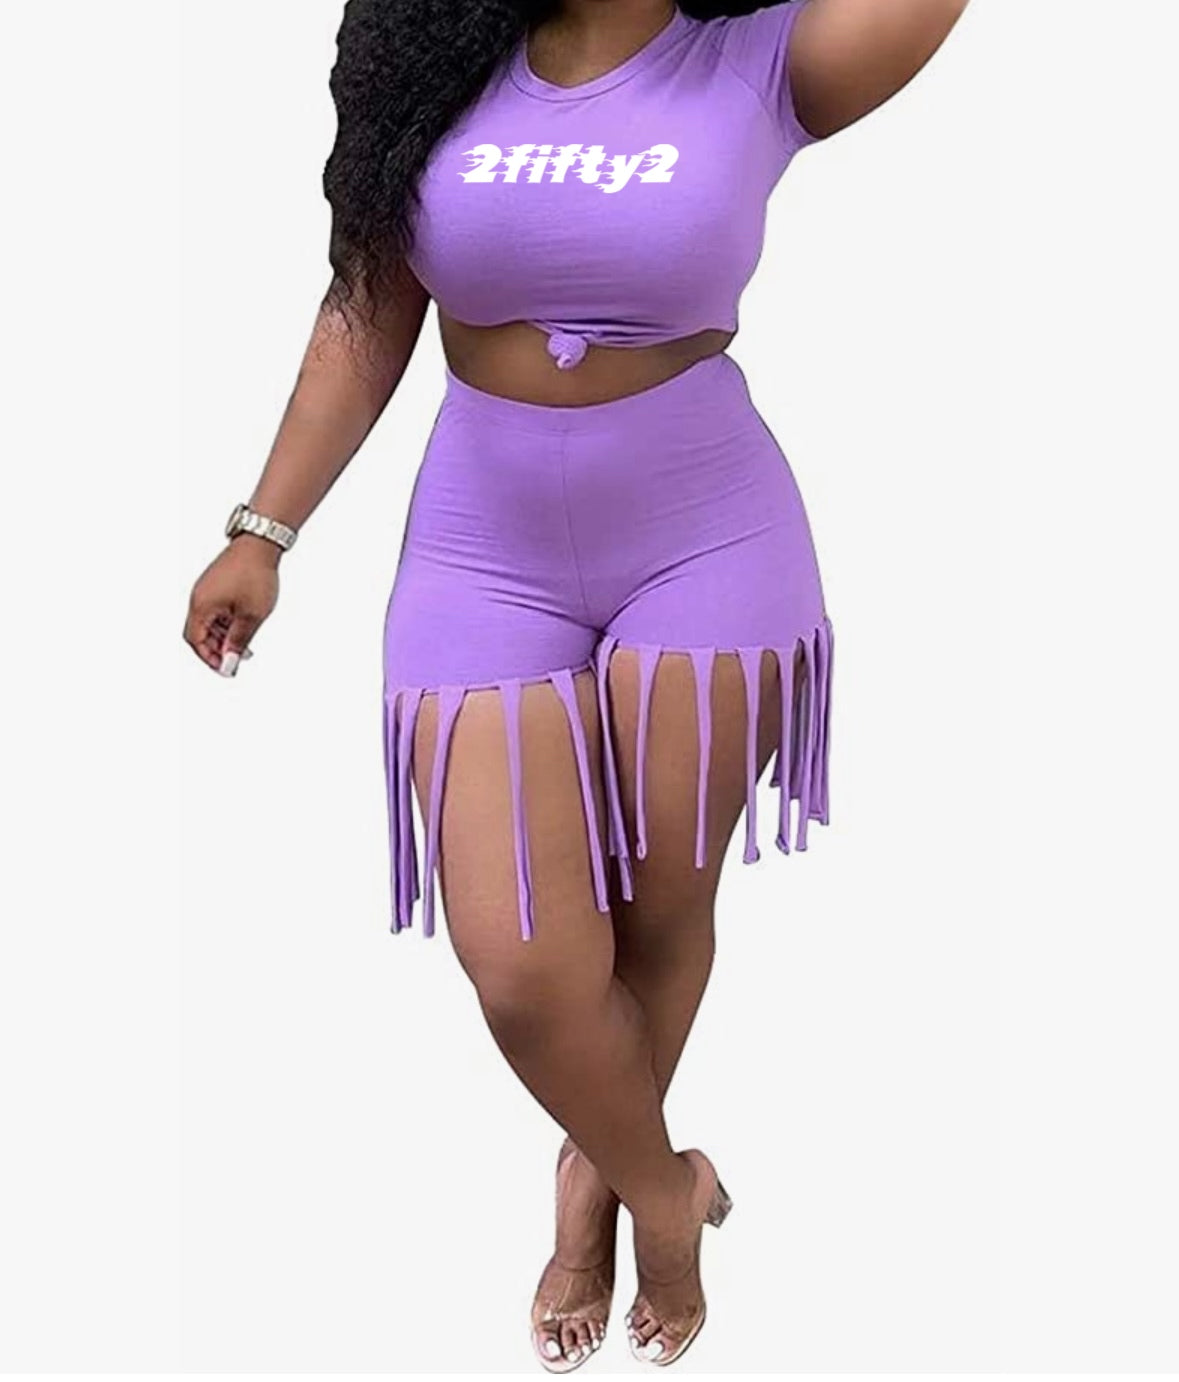 REORIAFEE Casual Suit Matching Set Festival Outfits Two Piece Women Fashion  Tees O Neck Top + Shorts Short Sleeve Set T Shirt Purple M 